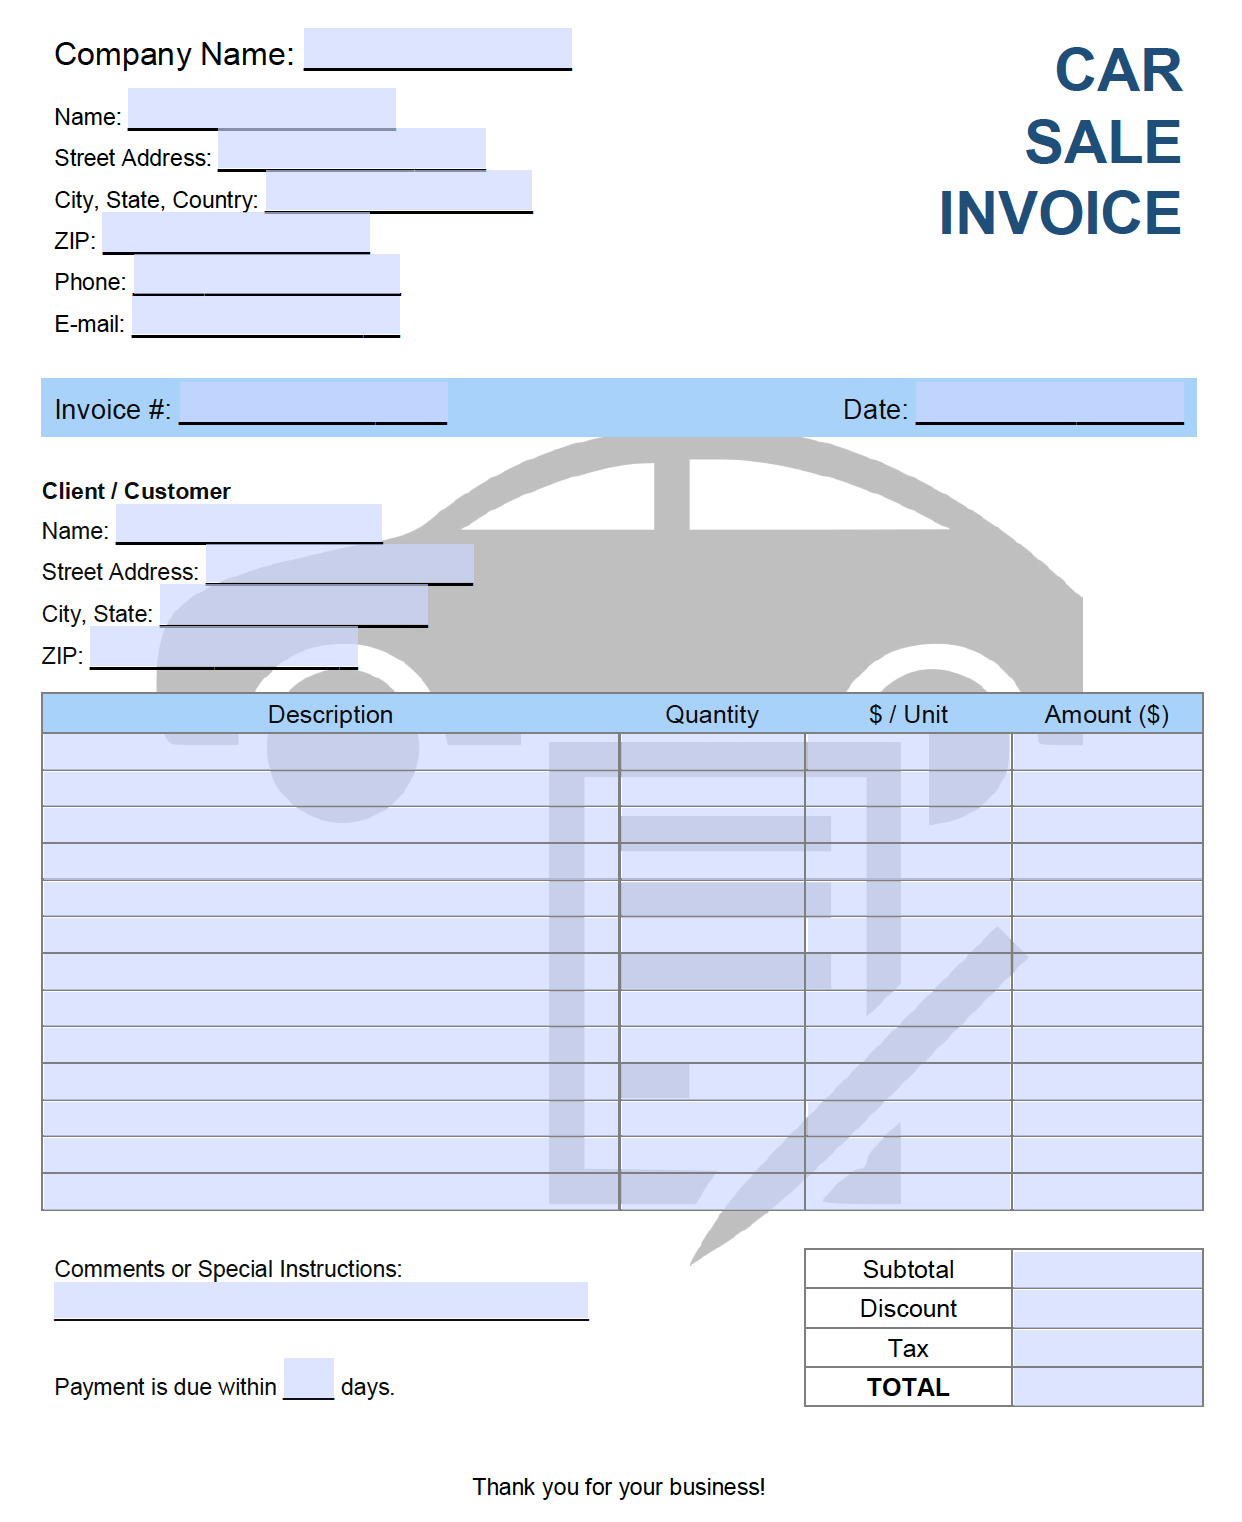 Free Car Sales Invoice Template  PDF  WORD  EXCEL Intended For Car Sales Invoice Template Free Download